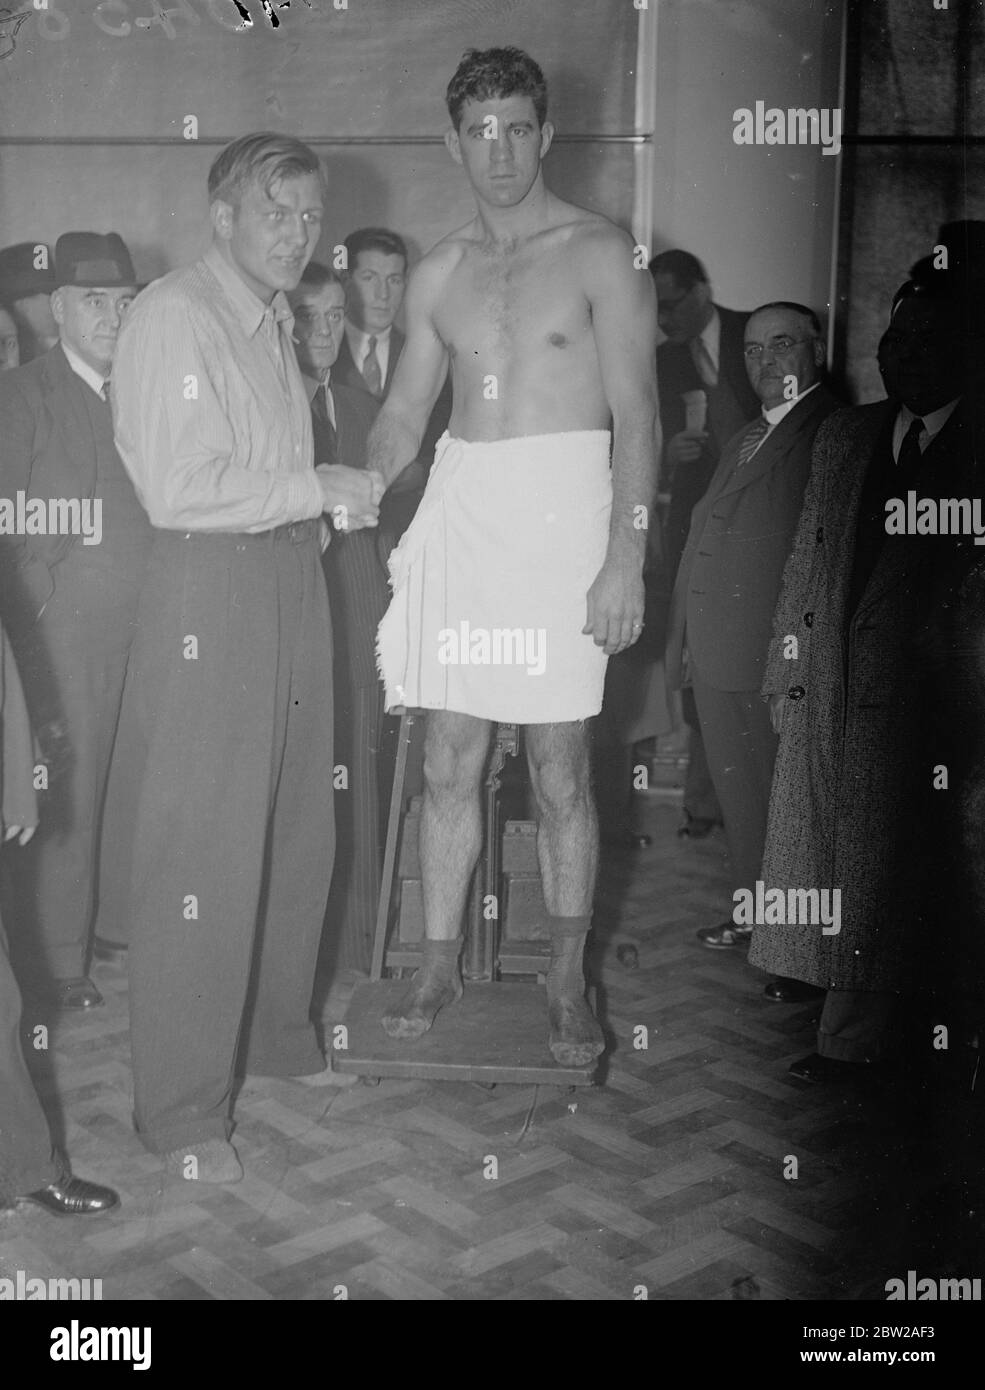 Marie Strickland and Walter Neusel weigh in for Wembley fight. Marie Strickland and Walter Neusel, the German, weighed in at the British Board of Boxing Control Offices at Dean Street, Soho, for their heavyweight fight tonight (Tuesday) at the Wembley Arena. Photo shows, Maurice Strickland (on scales), shaking hands Walter Neusel at the weigh in. 19 October 1937 Stock Photo